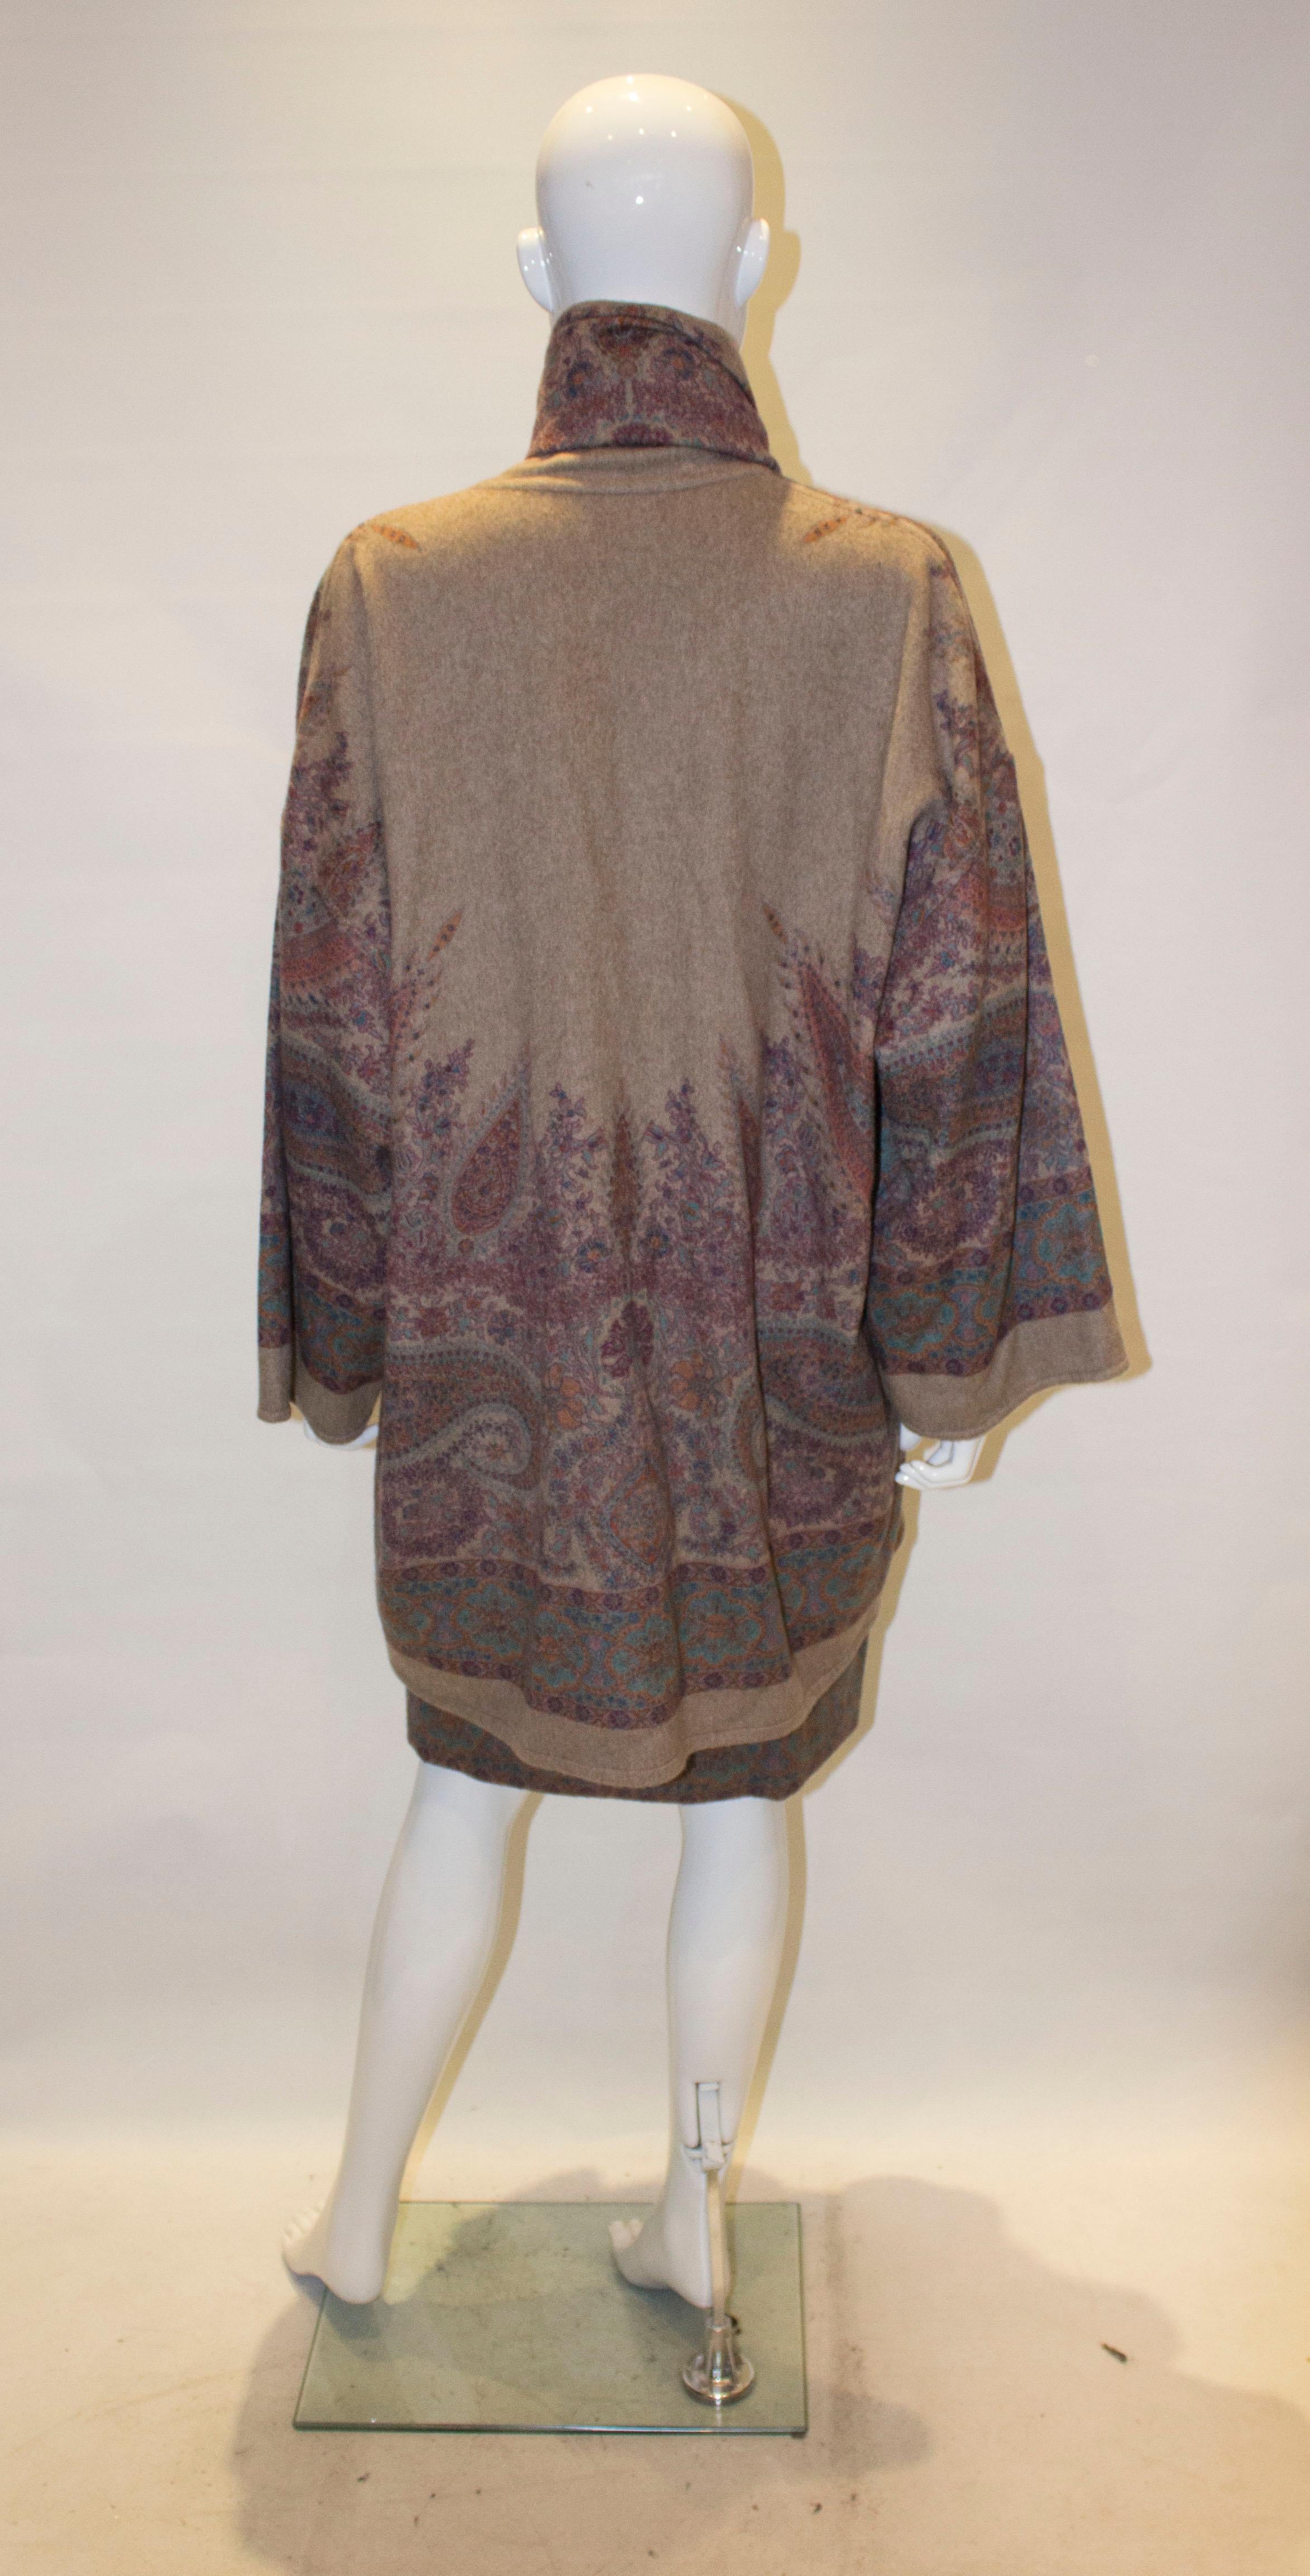 Vintage Cashmere Jacket with Paisley Print For Sale 2